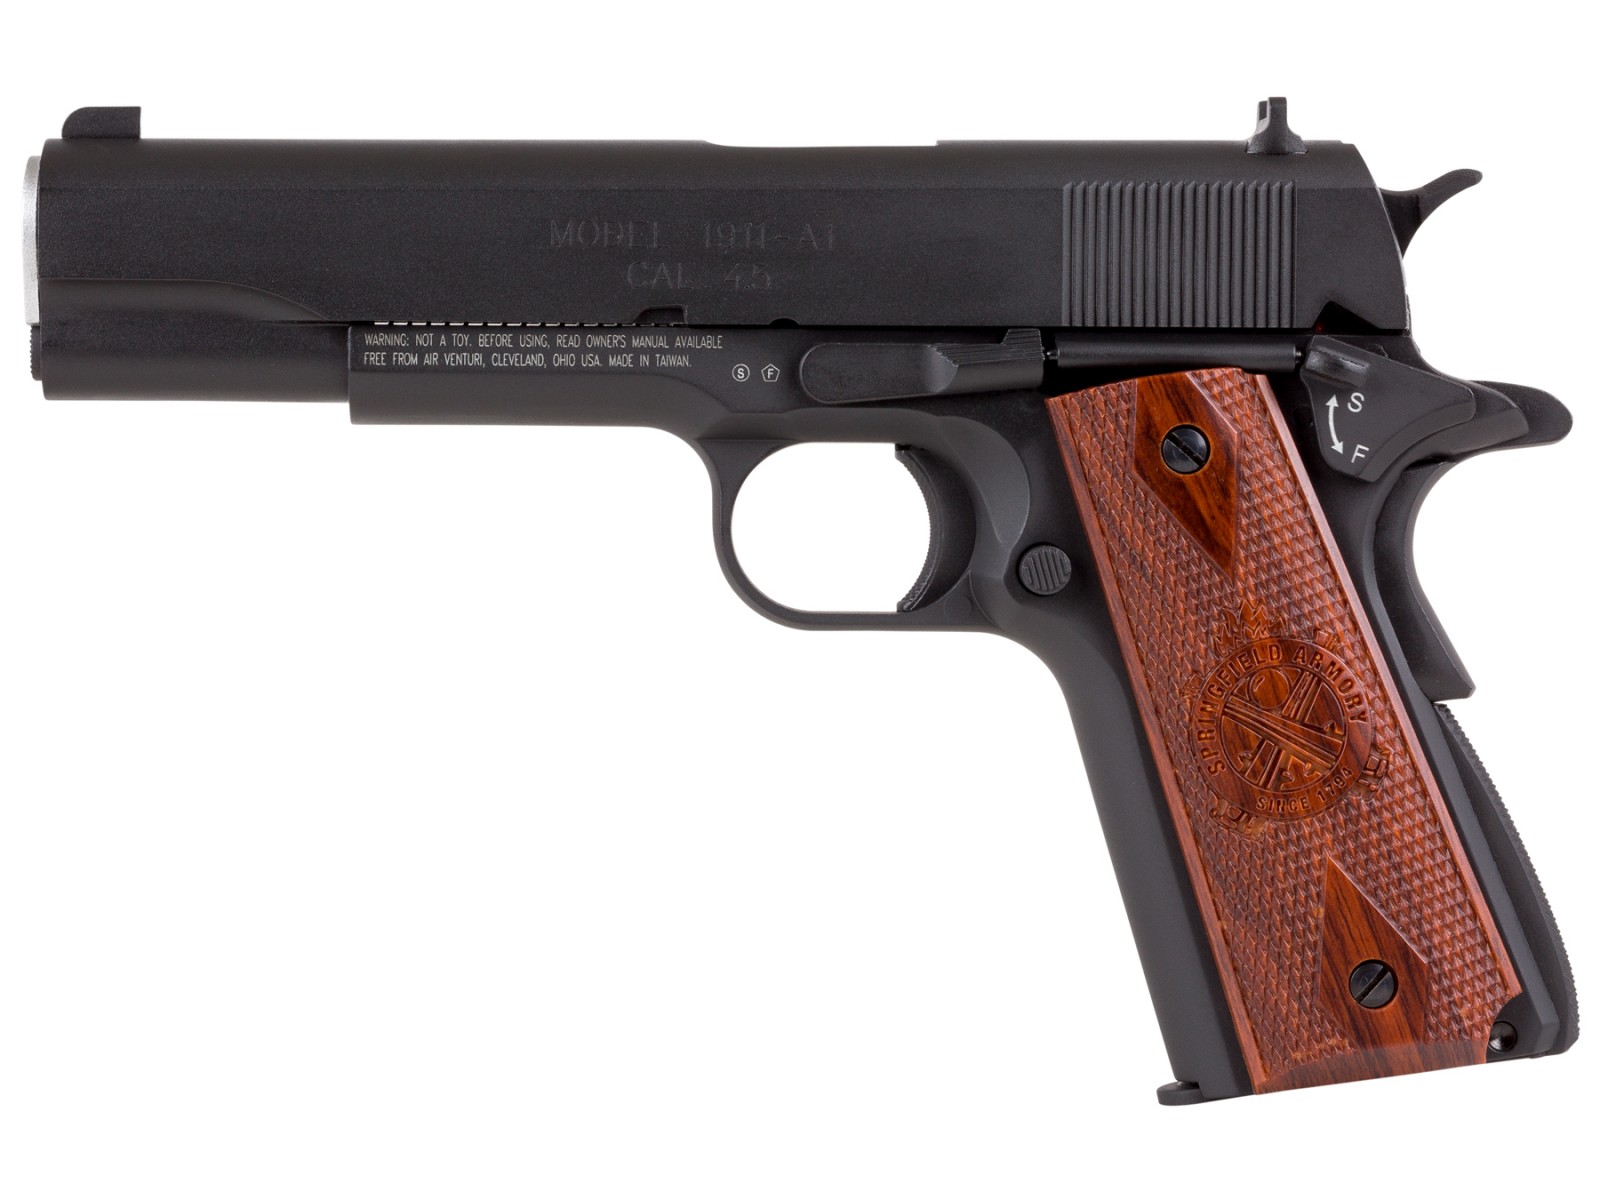 Number #3 Best Air Pistols - Springfield Armory Mil Spec 1911